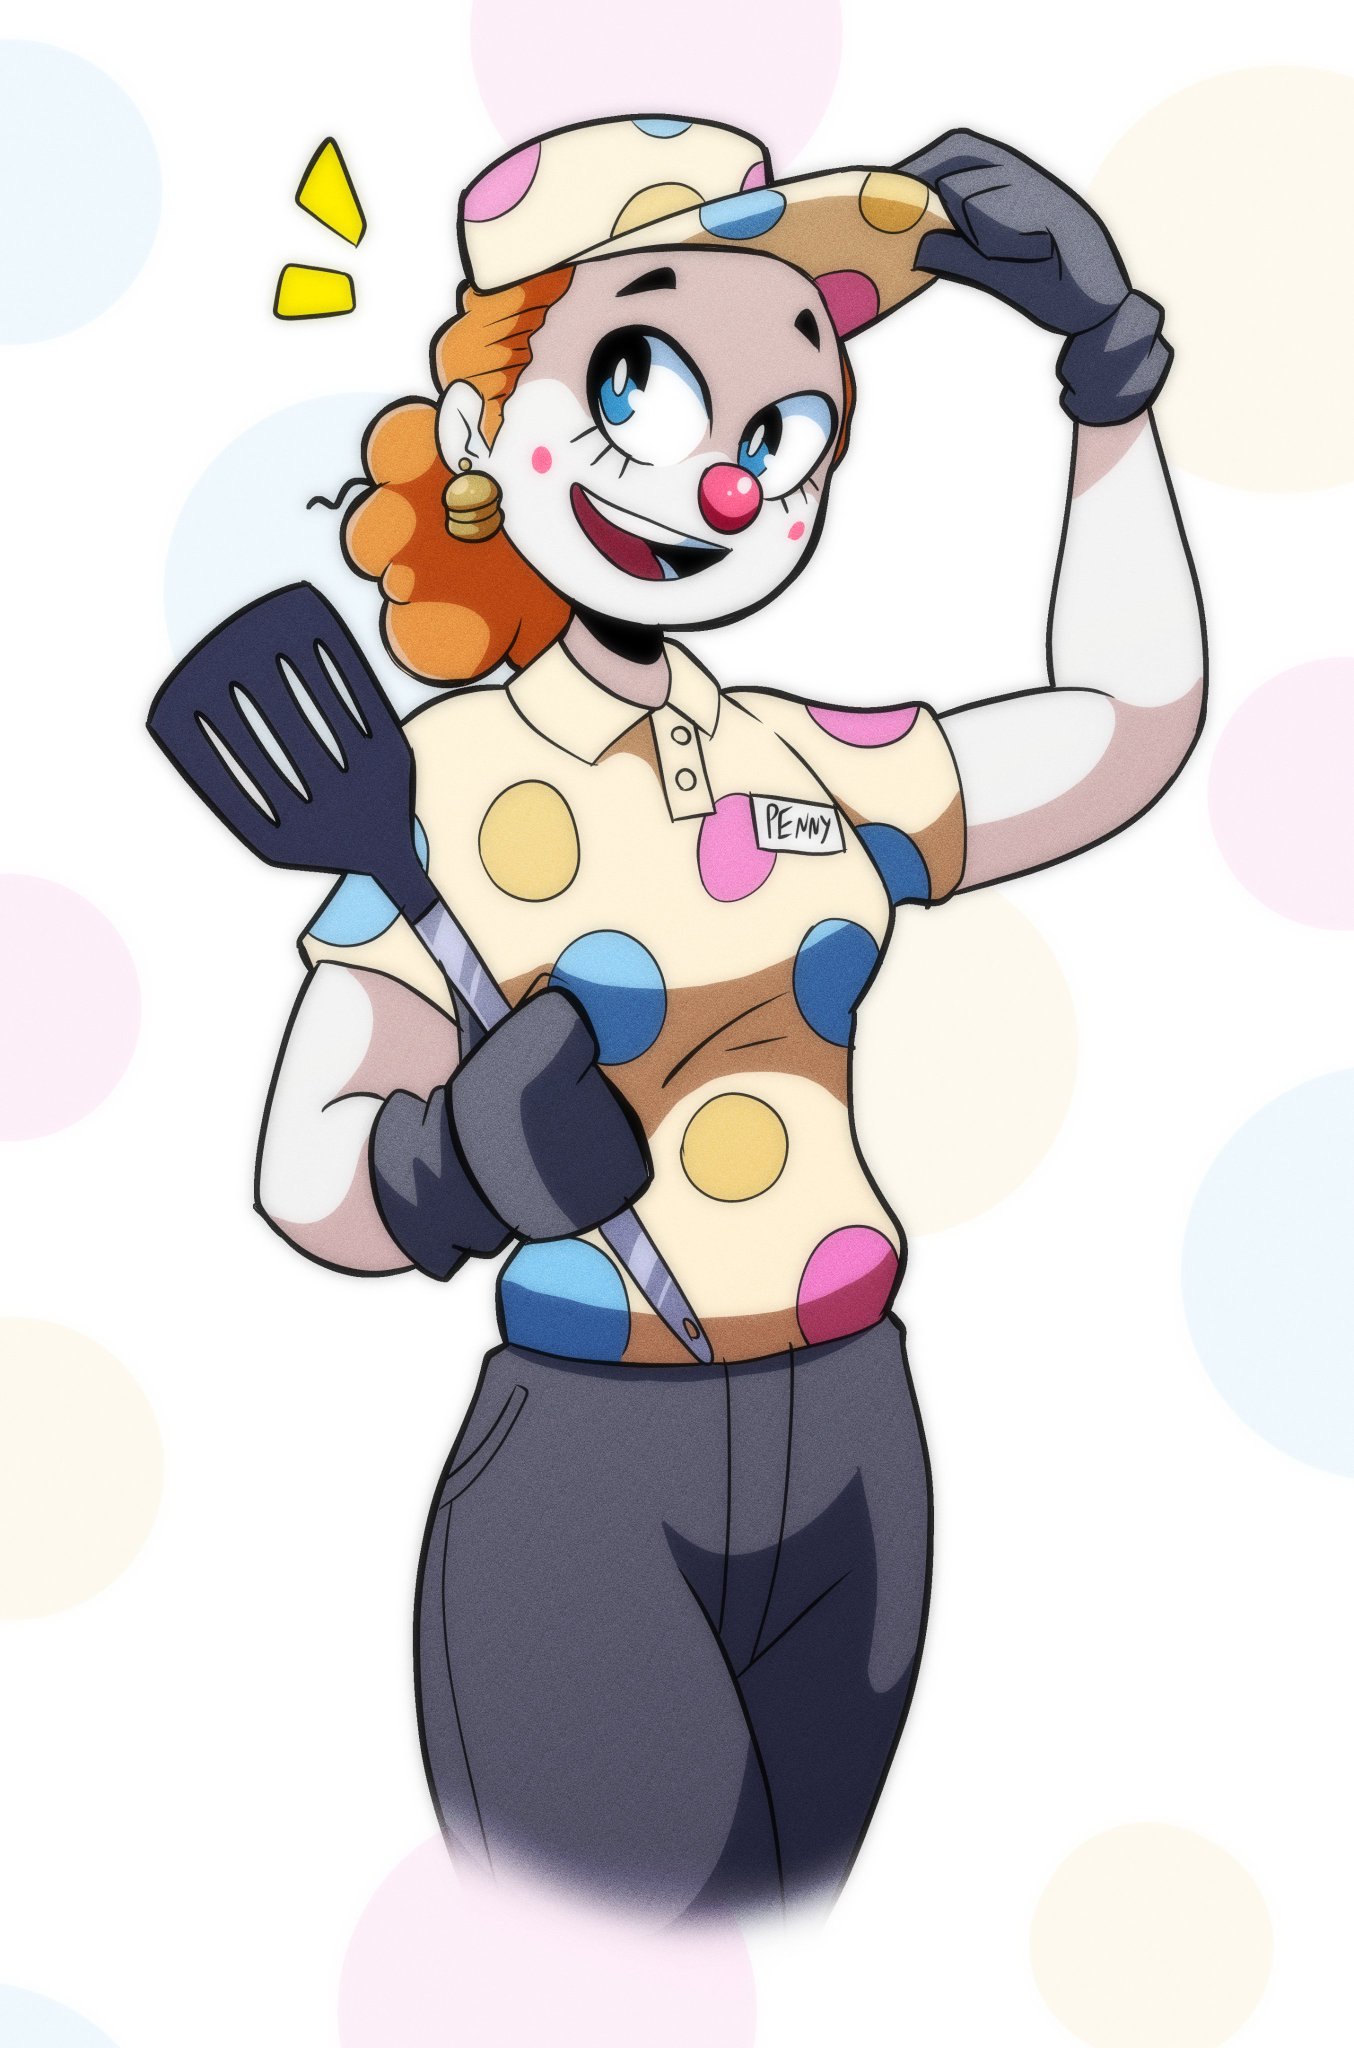 Chromatroid Commissions Open On Twitter I Appreciate The Good Vibes Burger Clown Penny From Worthikids Bigtop Burger Fanart Penny Bigtopburger Worthikids Art Illustration Https T Co Fme7vba8kr - culturez on twitter roblox brighteyesrblx gamestop vote workclock shades to go limited